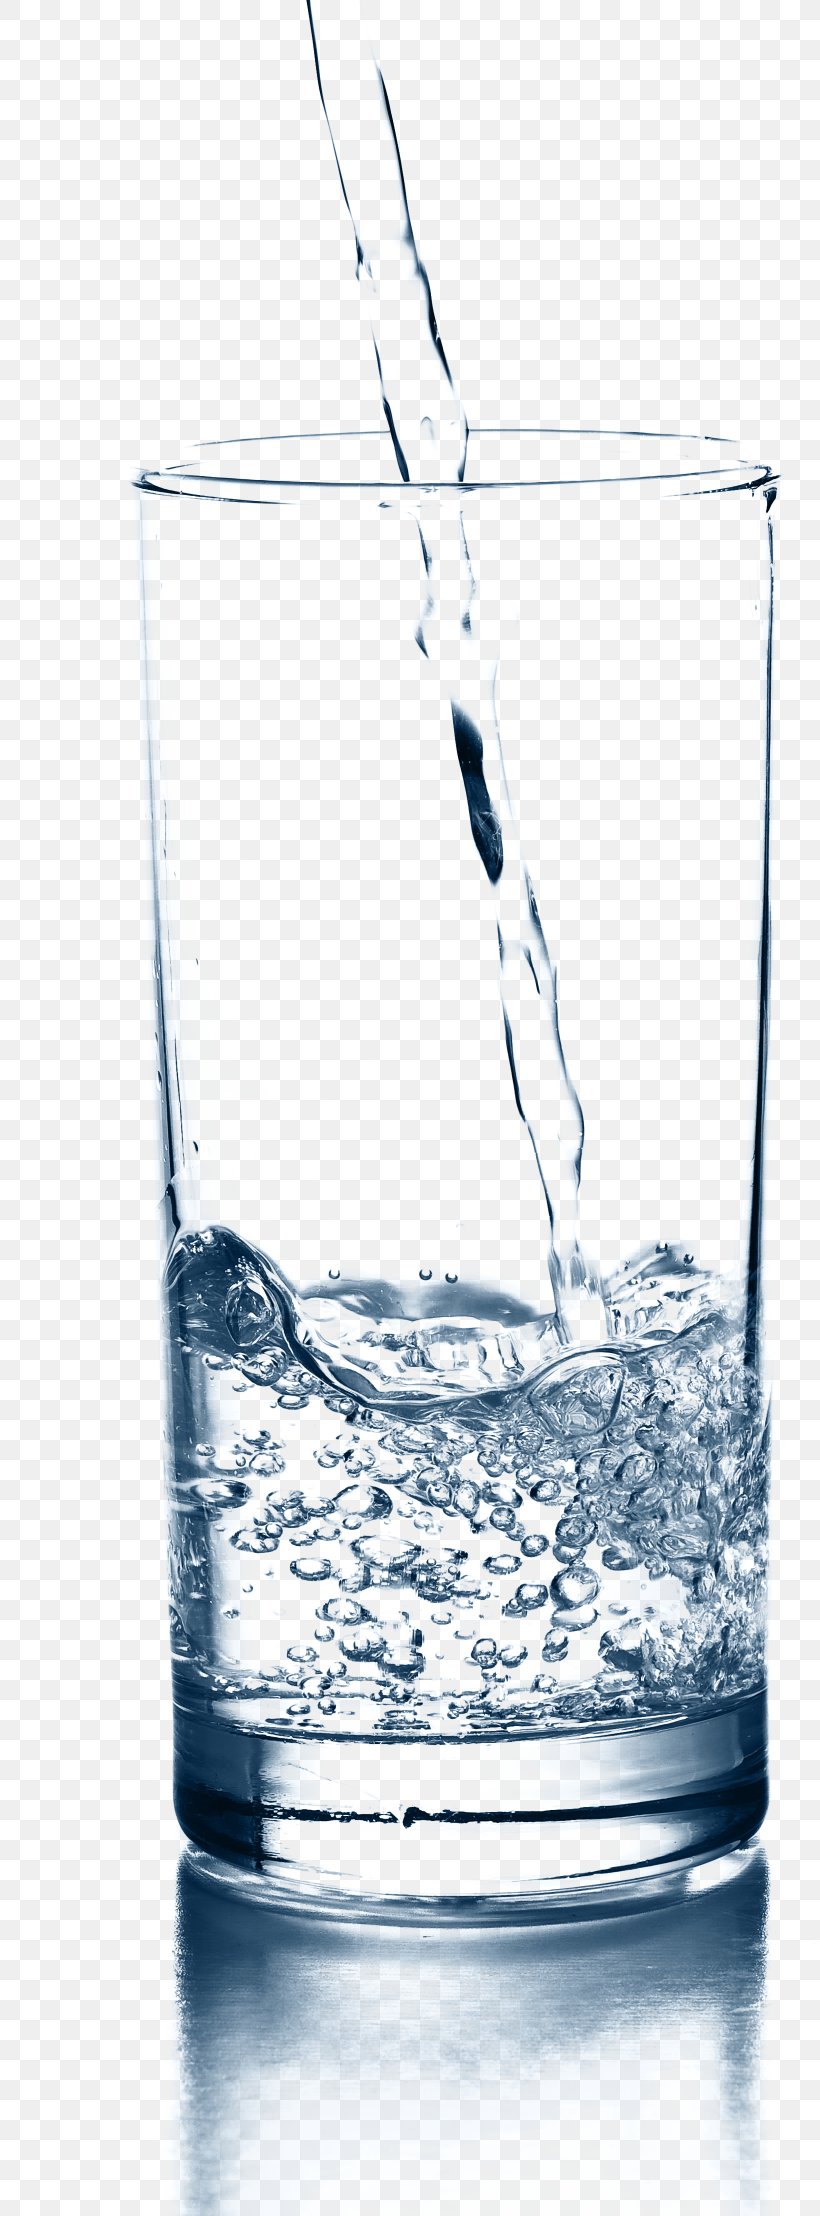 Drinking Water Drinking Water, PNG, 1640x4432px, Water, Blue, Bottle, Can Stock Photo, Drinking Download Free